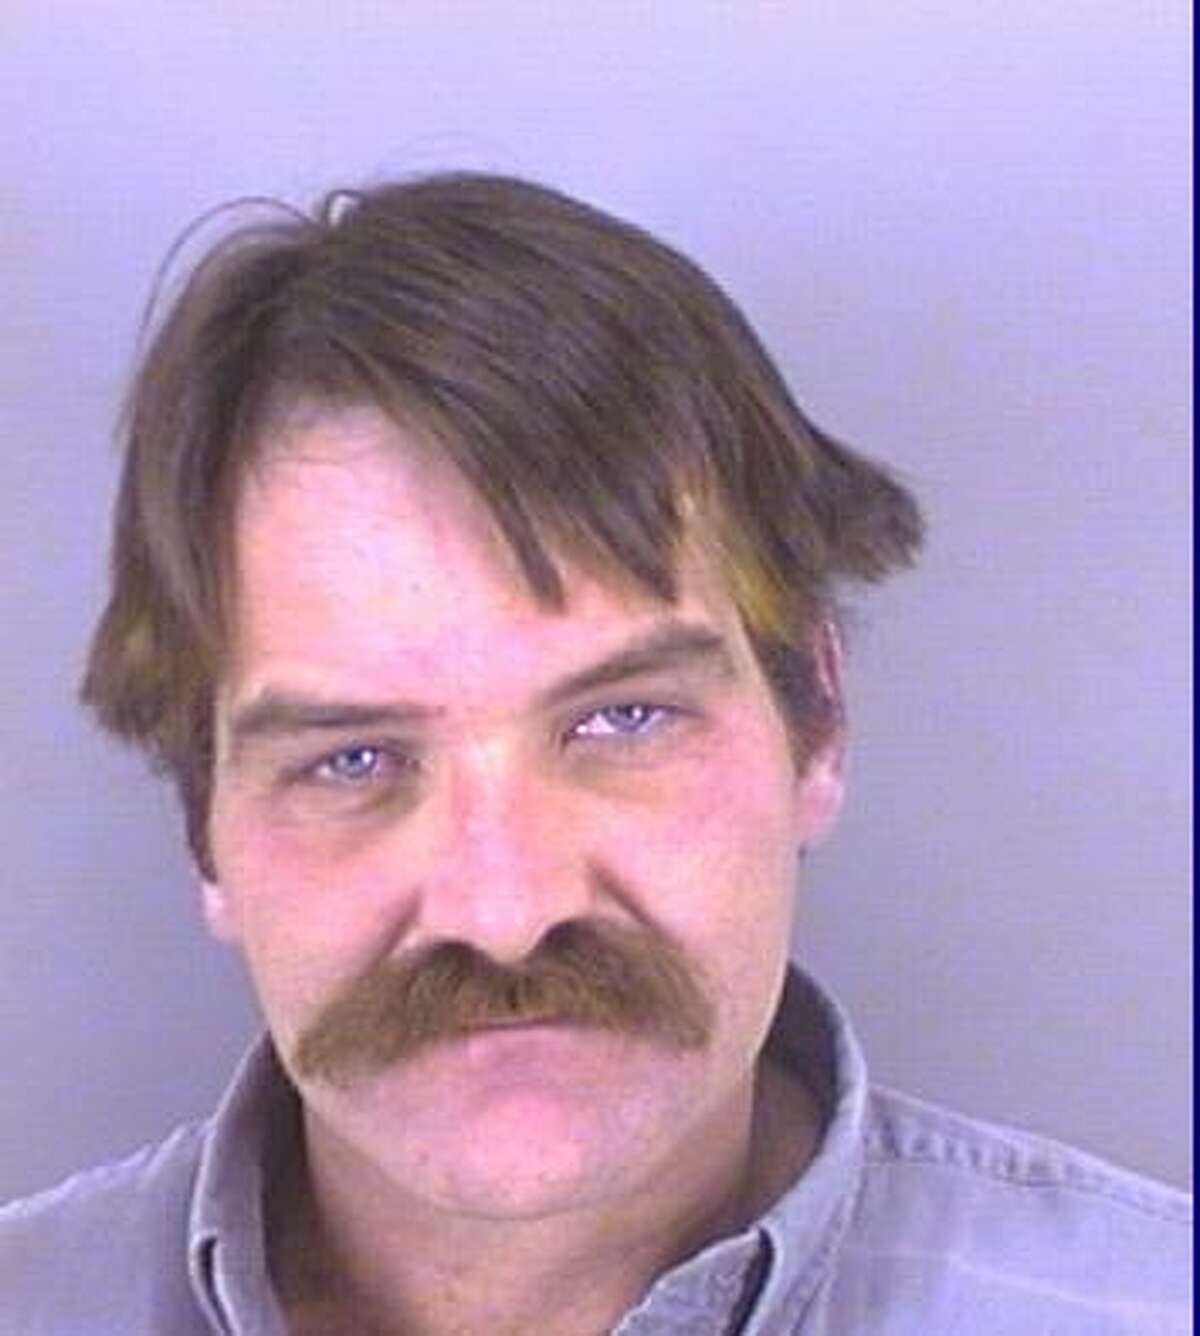 Terry Stevens' mugshot from his fifth DWI arrest in 2004.